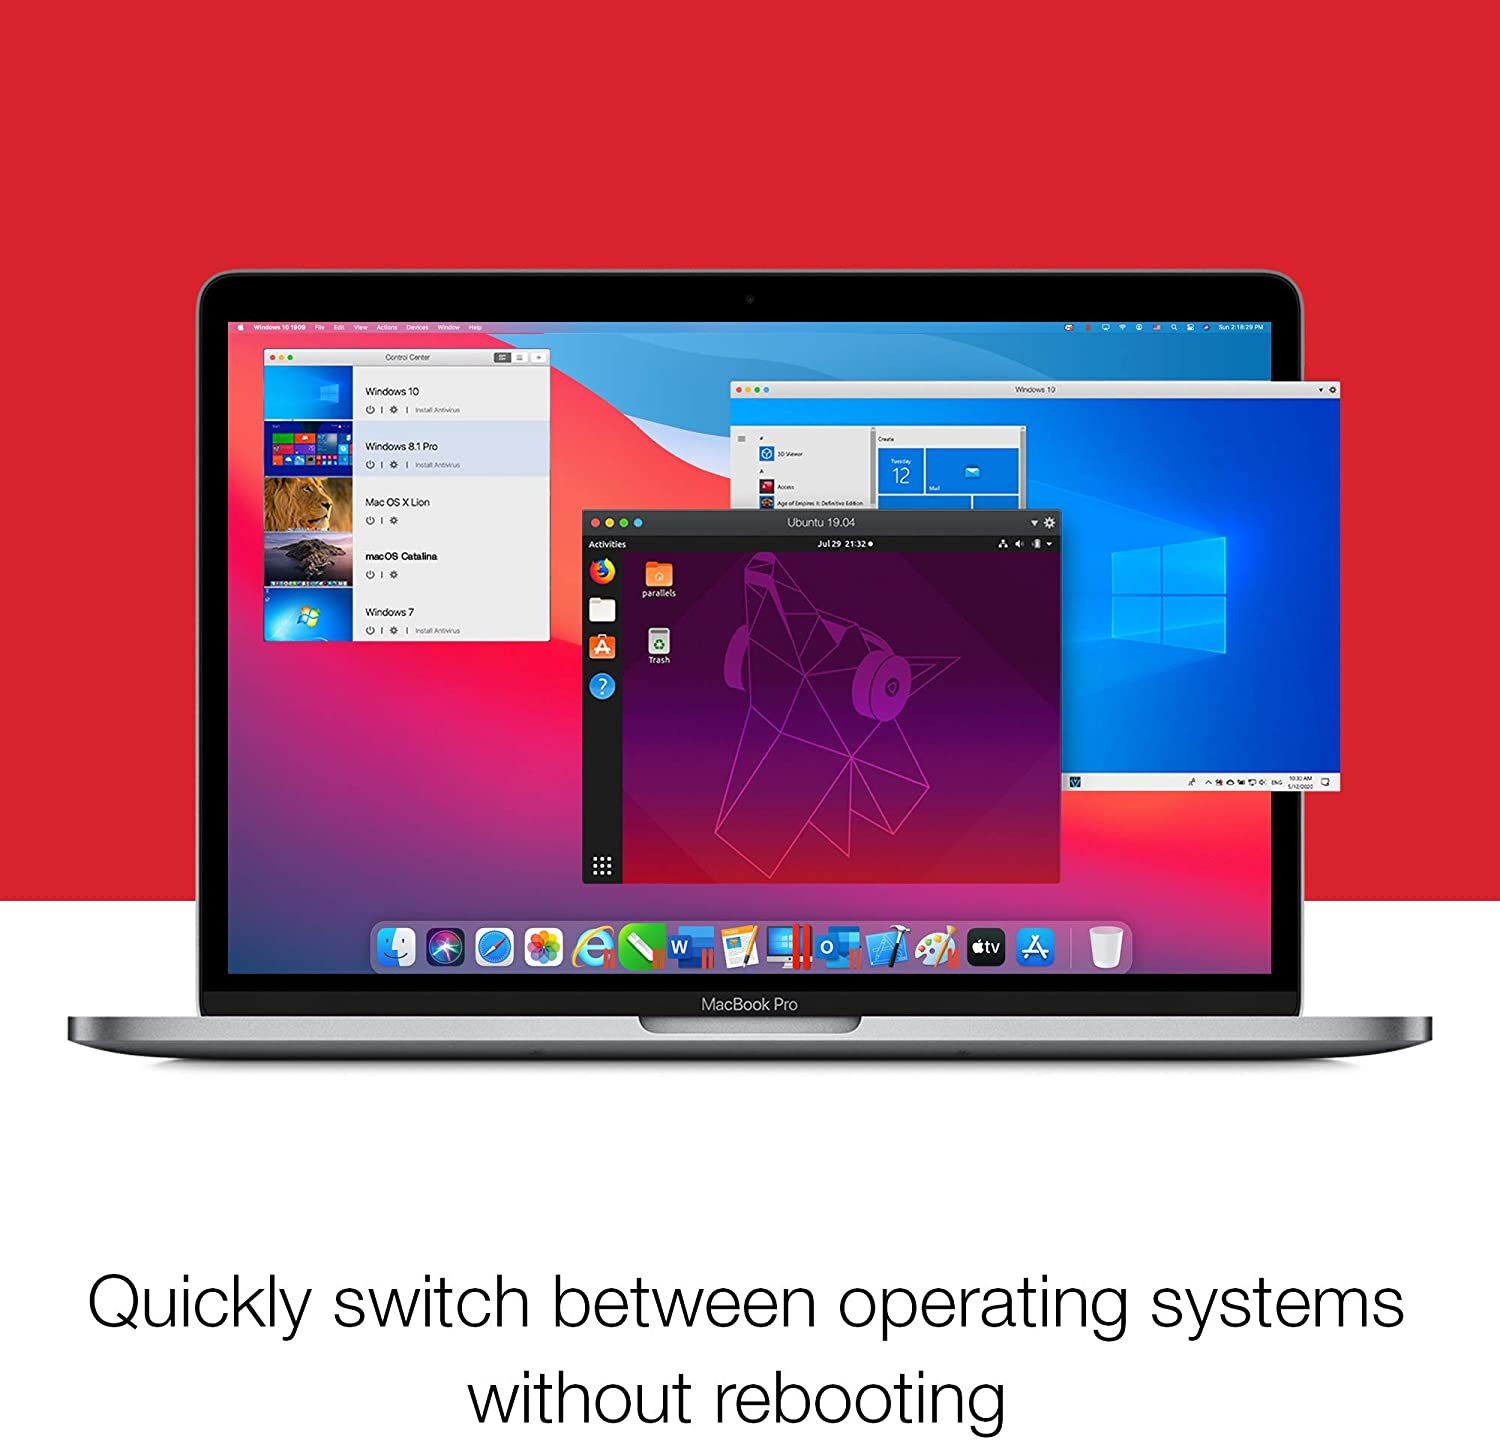 parallels desktop for mac pro edition upgrade (1 year)